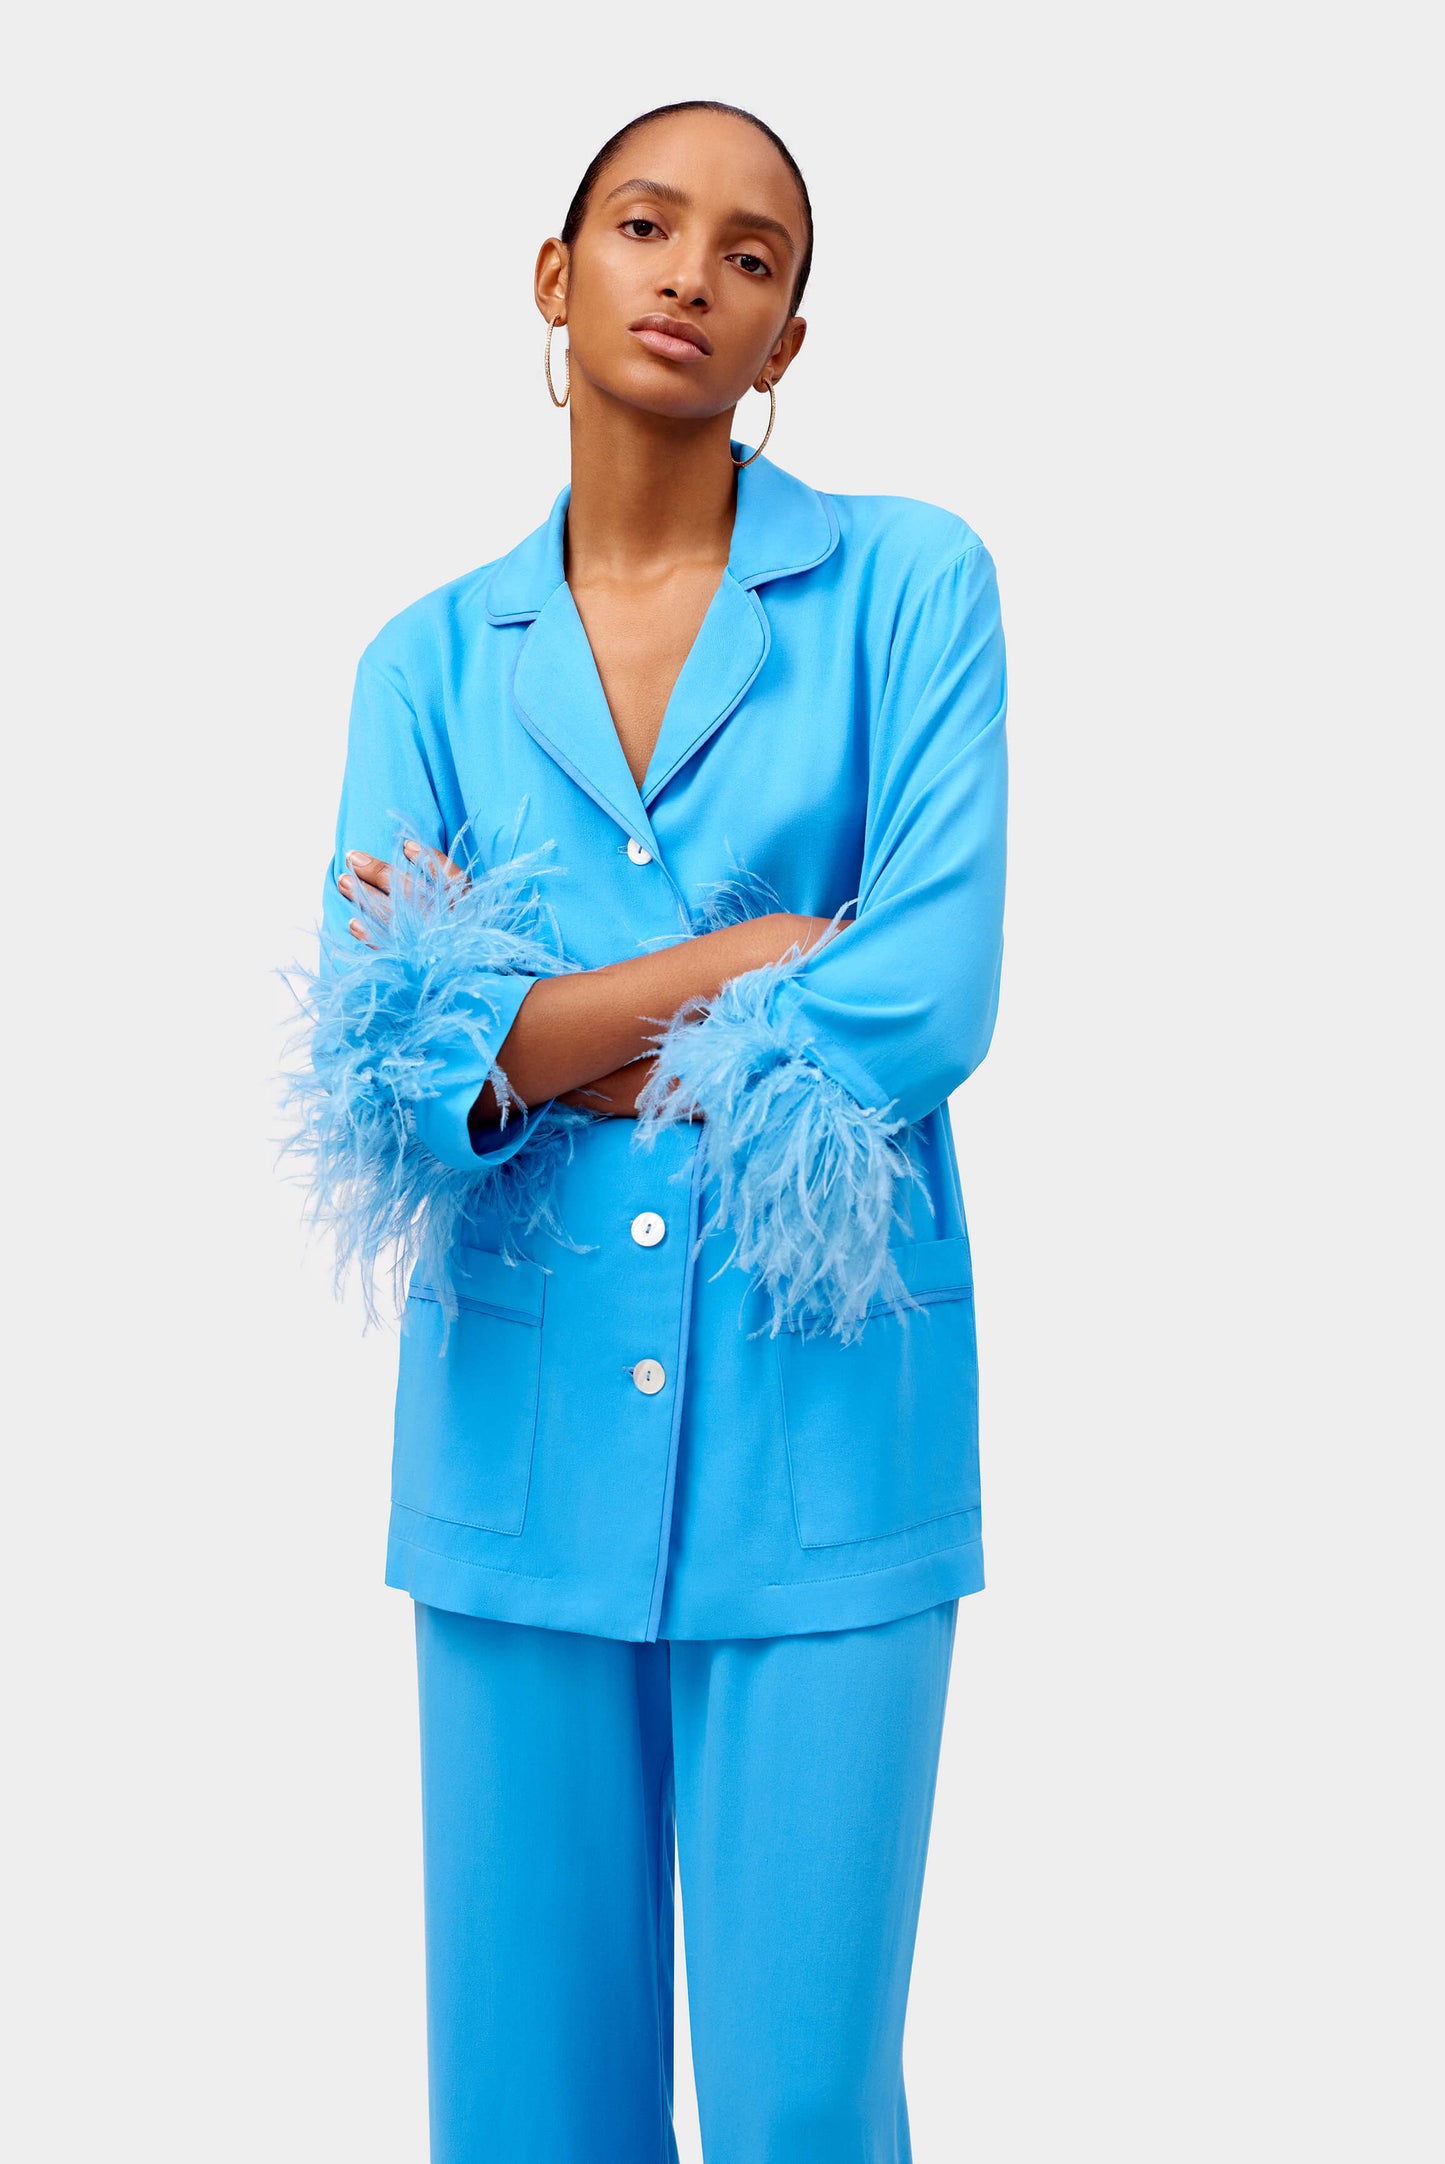 Party Pajama Set with Detachable Feathers in Bright Blue